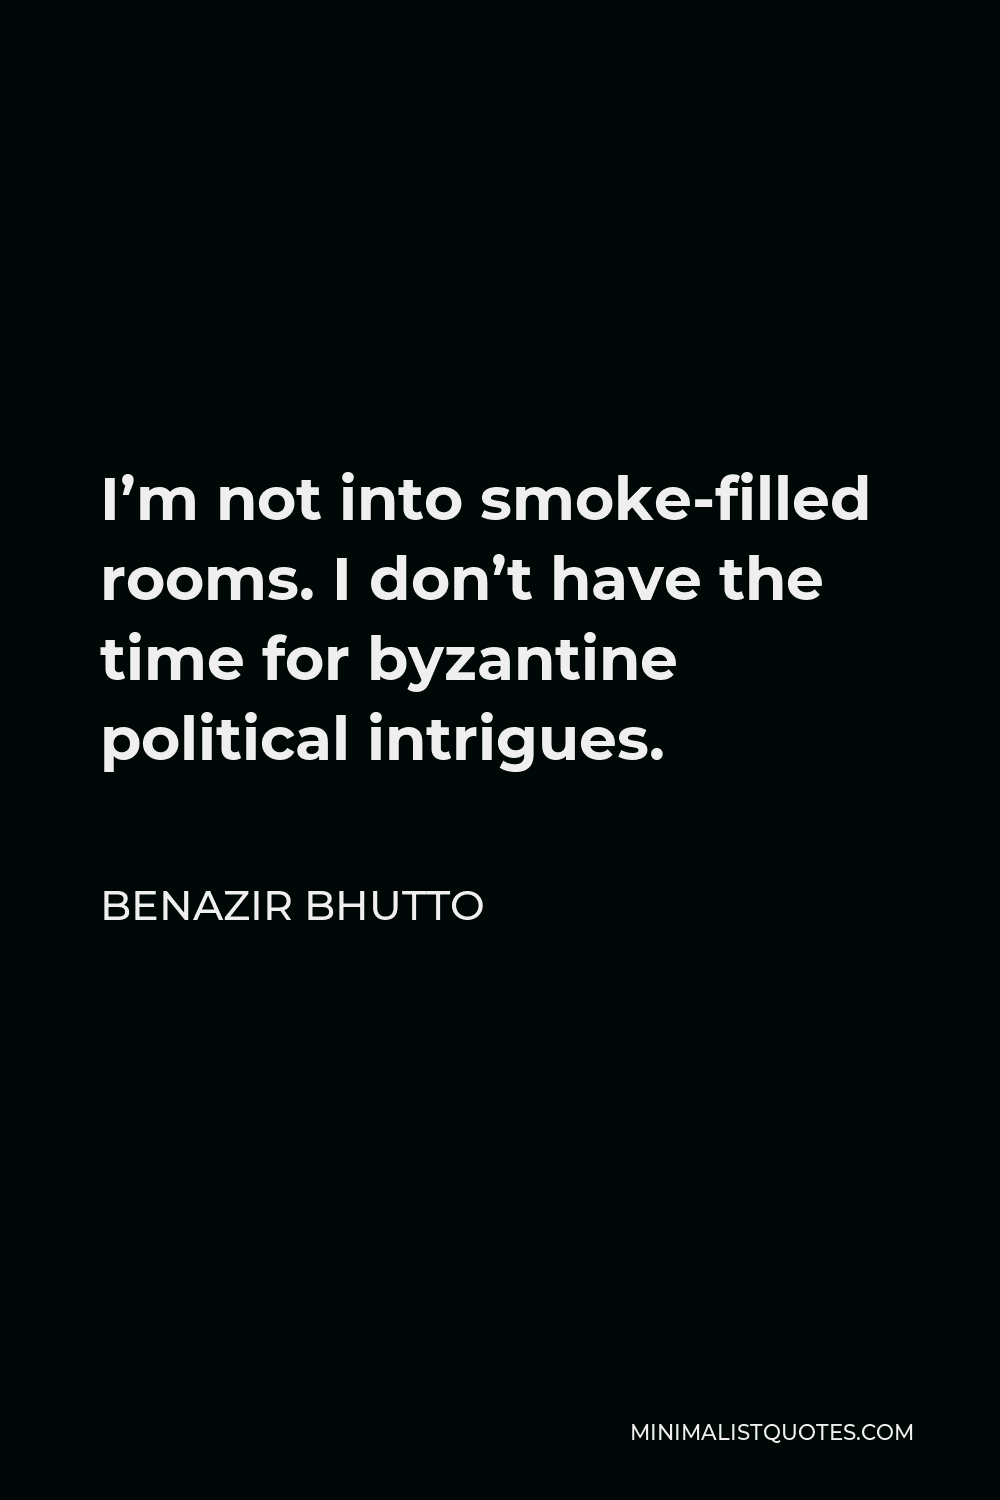 Benazir Bhutto Quote - I’m not into smoke-filled rooms. I don’t have the time for byzantine political intrigues.